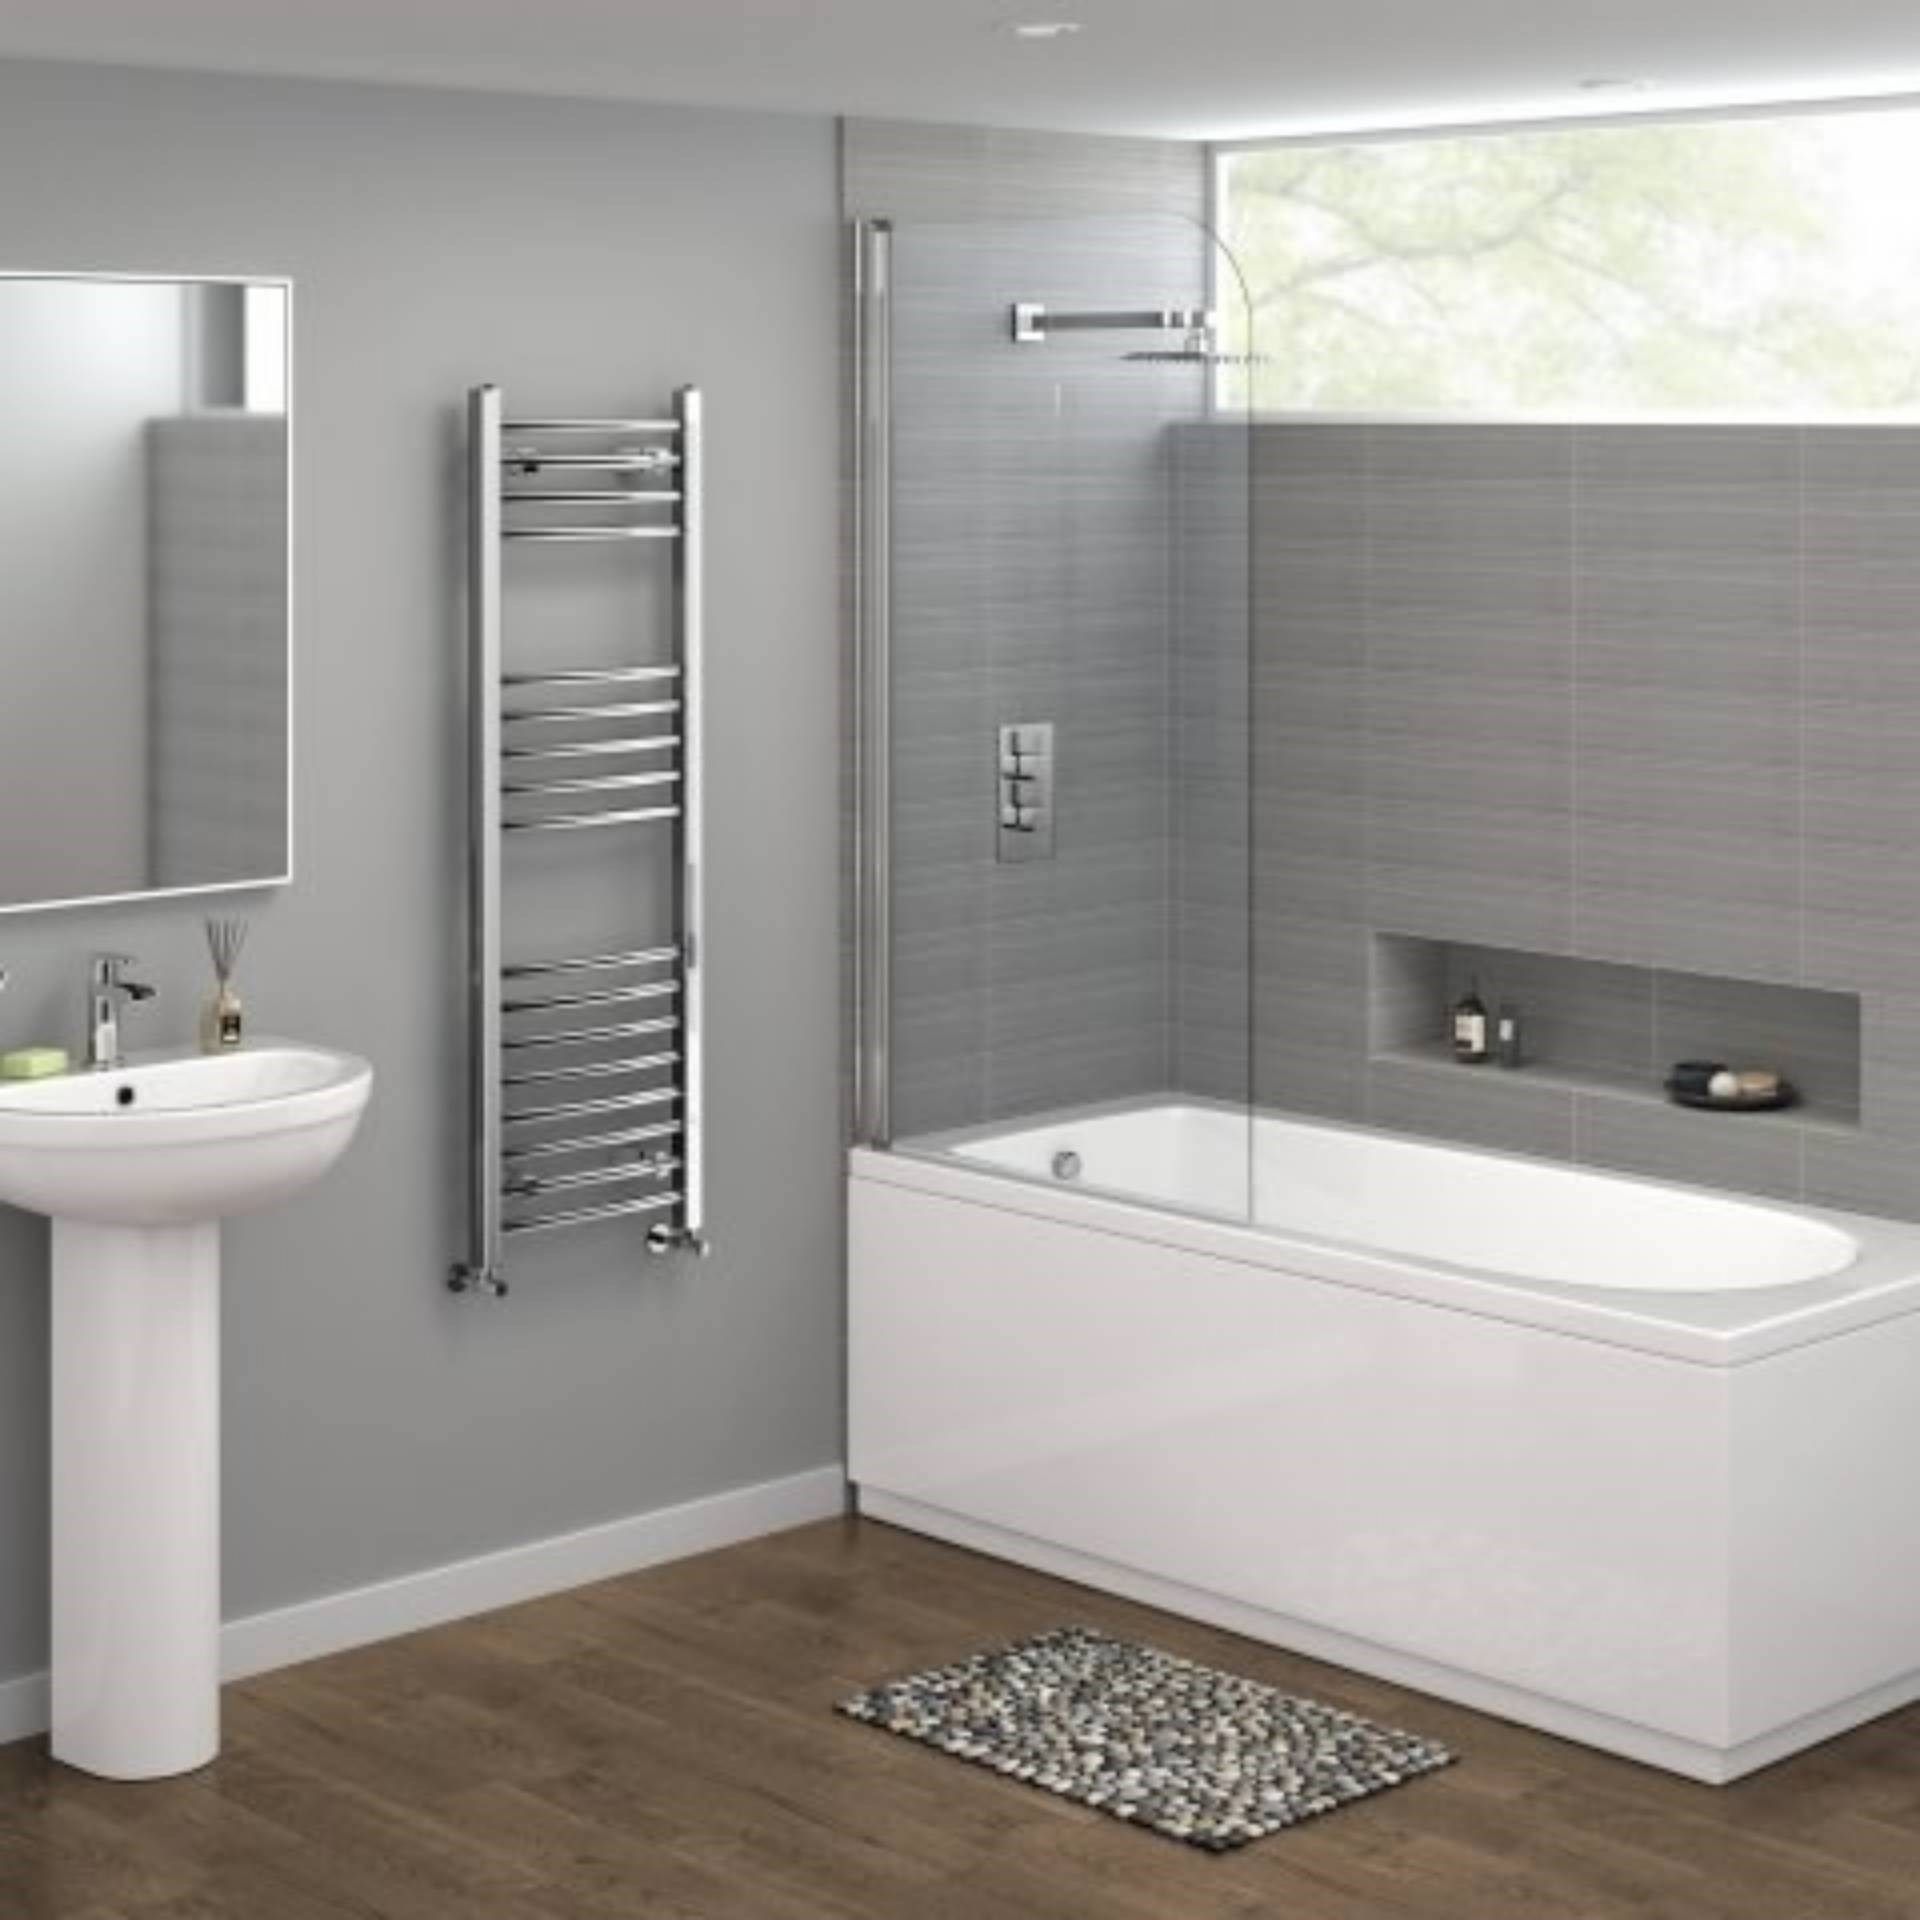 1200x400mm - 20mm Tubes - Chrome Curved Rail Ladder Towel Radiator. Nc1200400.Our Nancy 1200x4... - Image 2 of 2